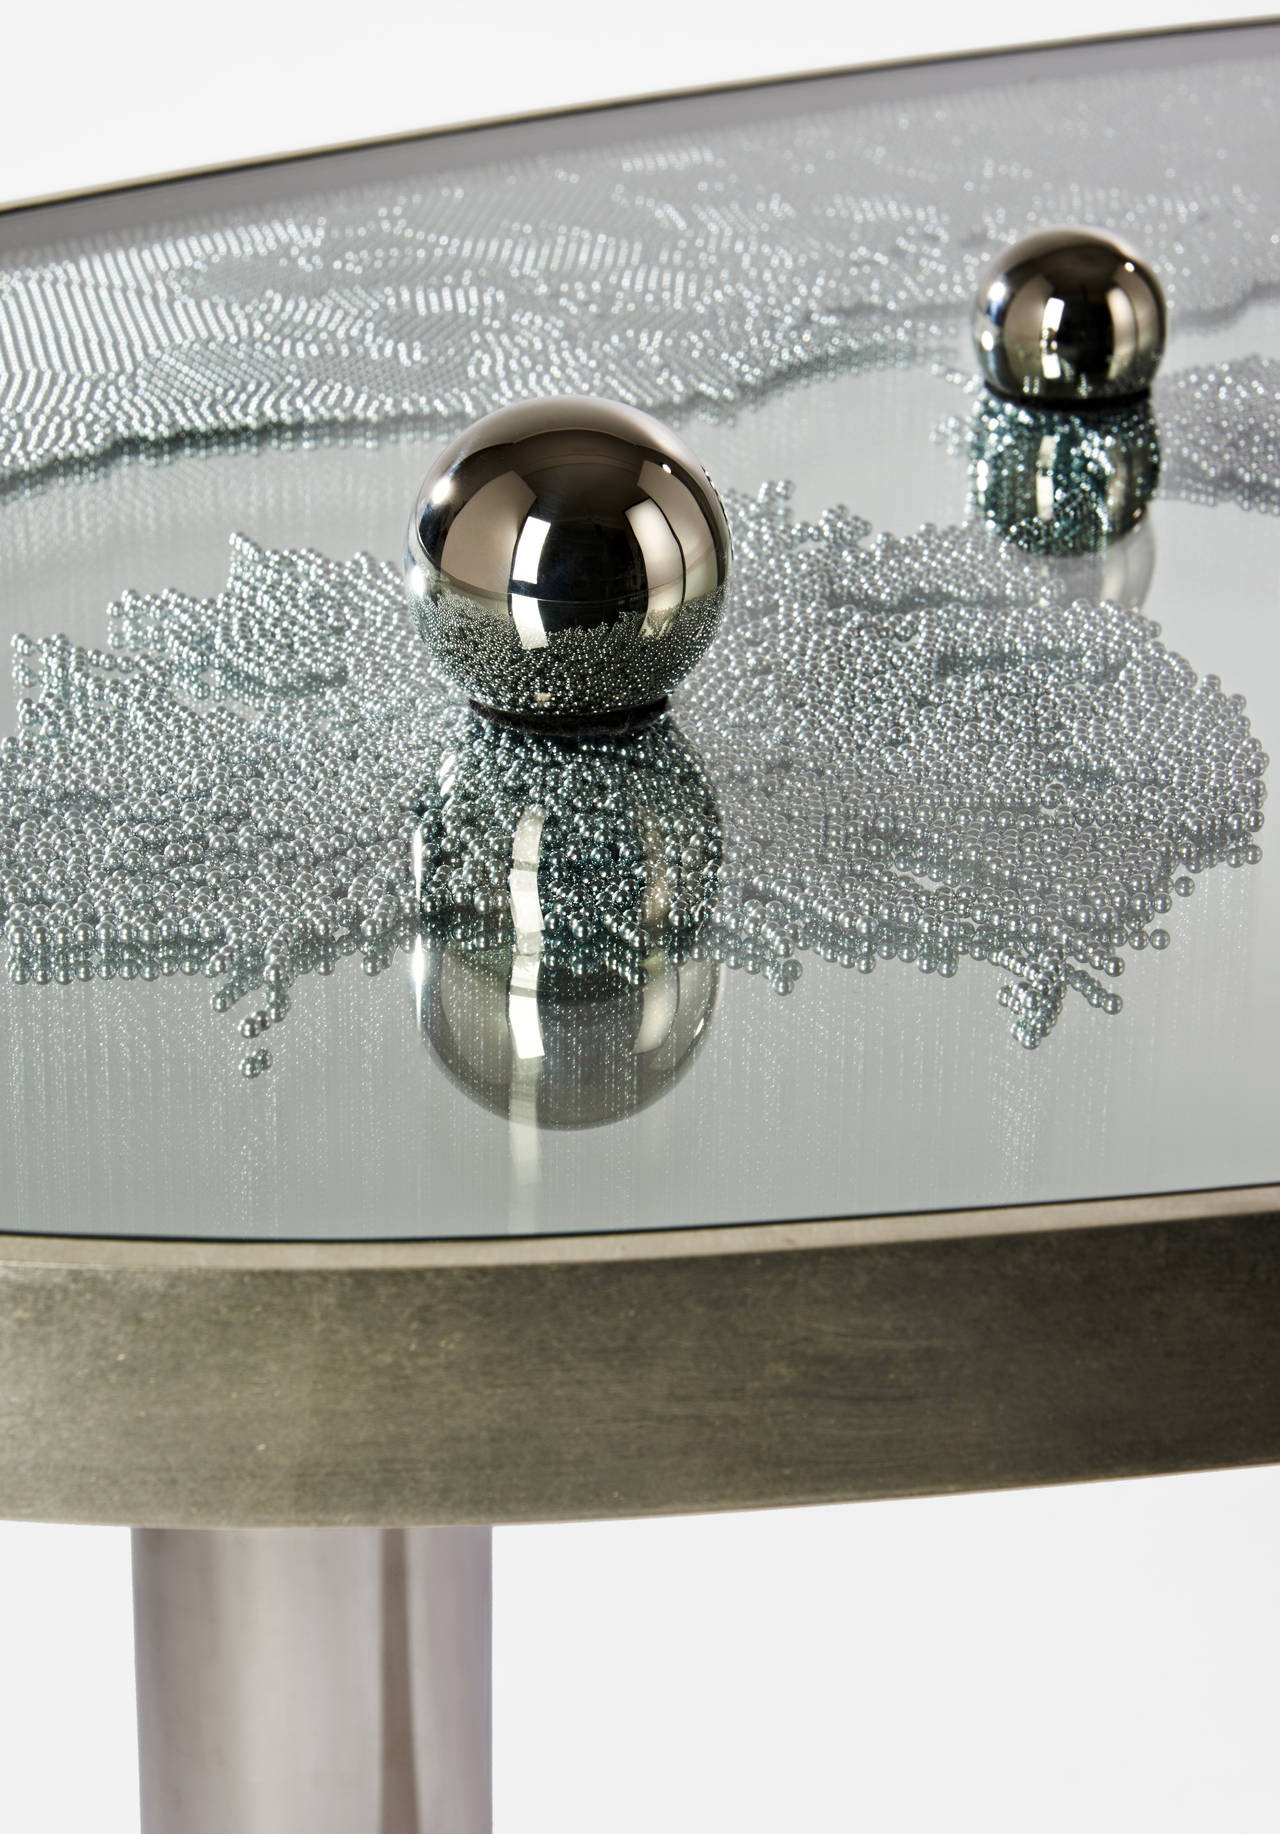 Table in bronze covered with white gold leaves and steel balls.
On the top of the glass tray there are 2 magnets to attract the balls and change the table's aesthetic.
Edition of eight.
Signed and numbered.

Hubert le Gall was born in Lyon in